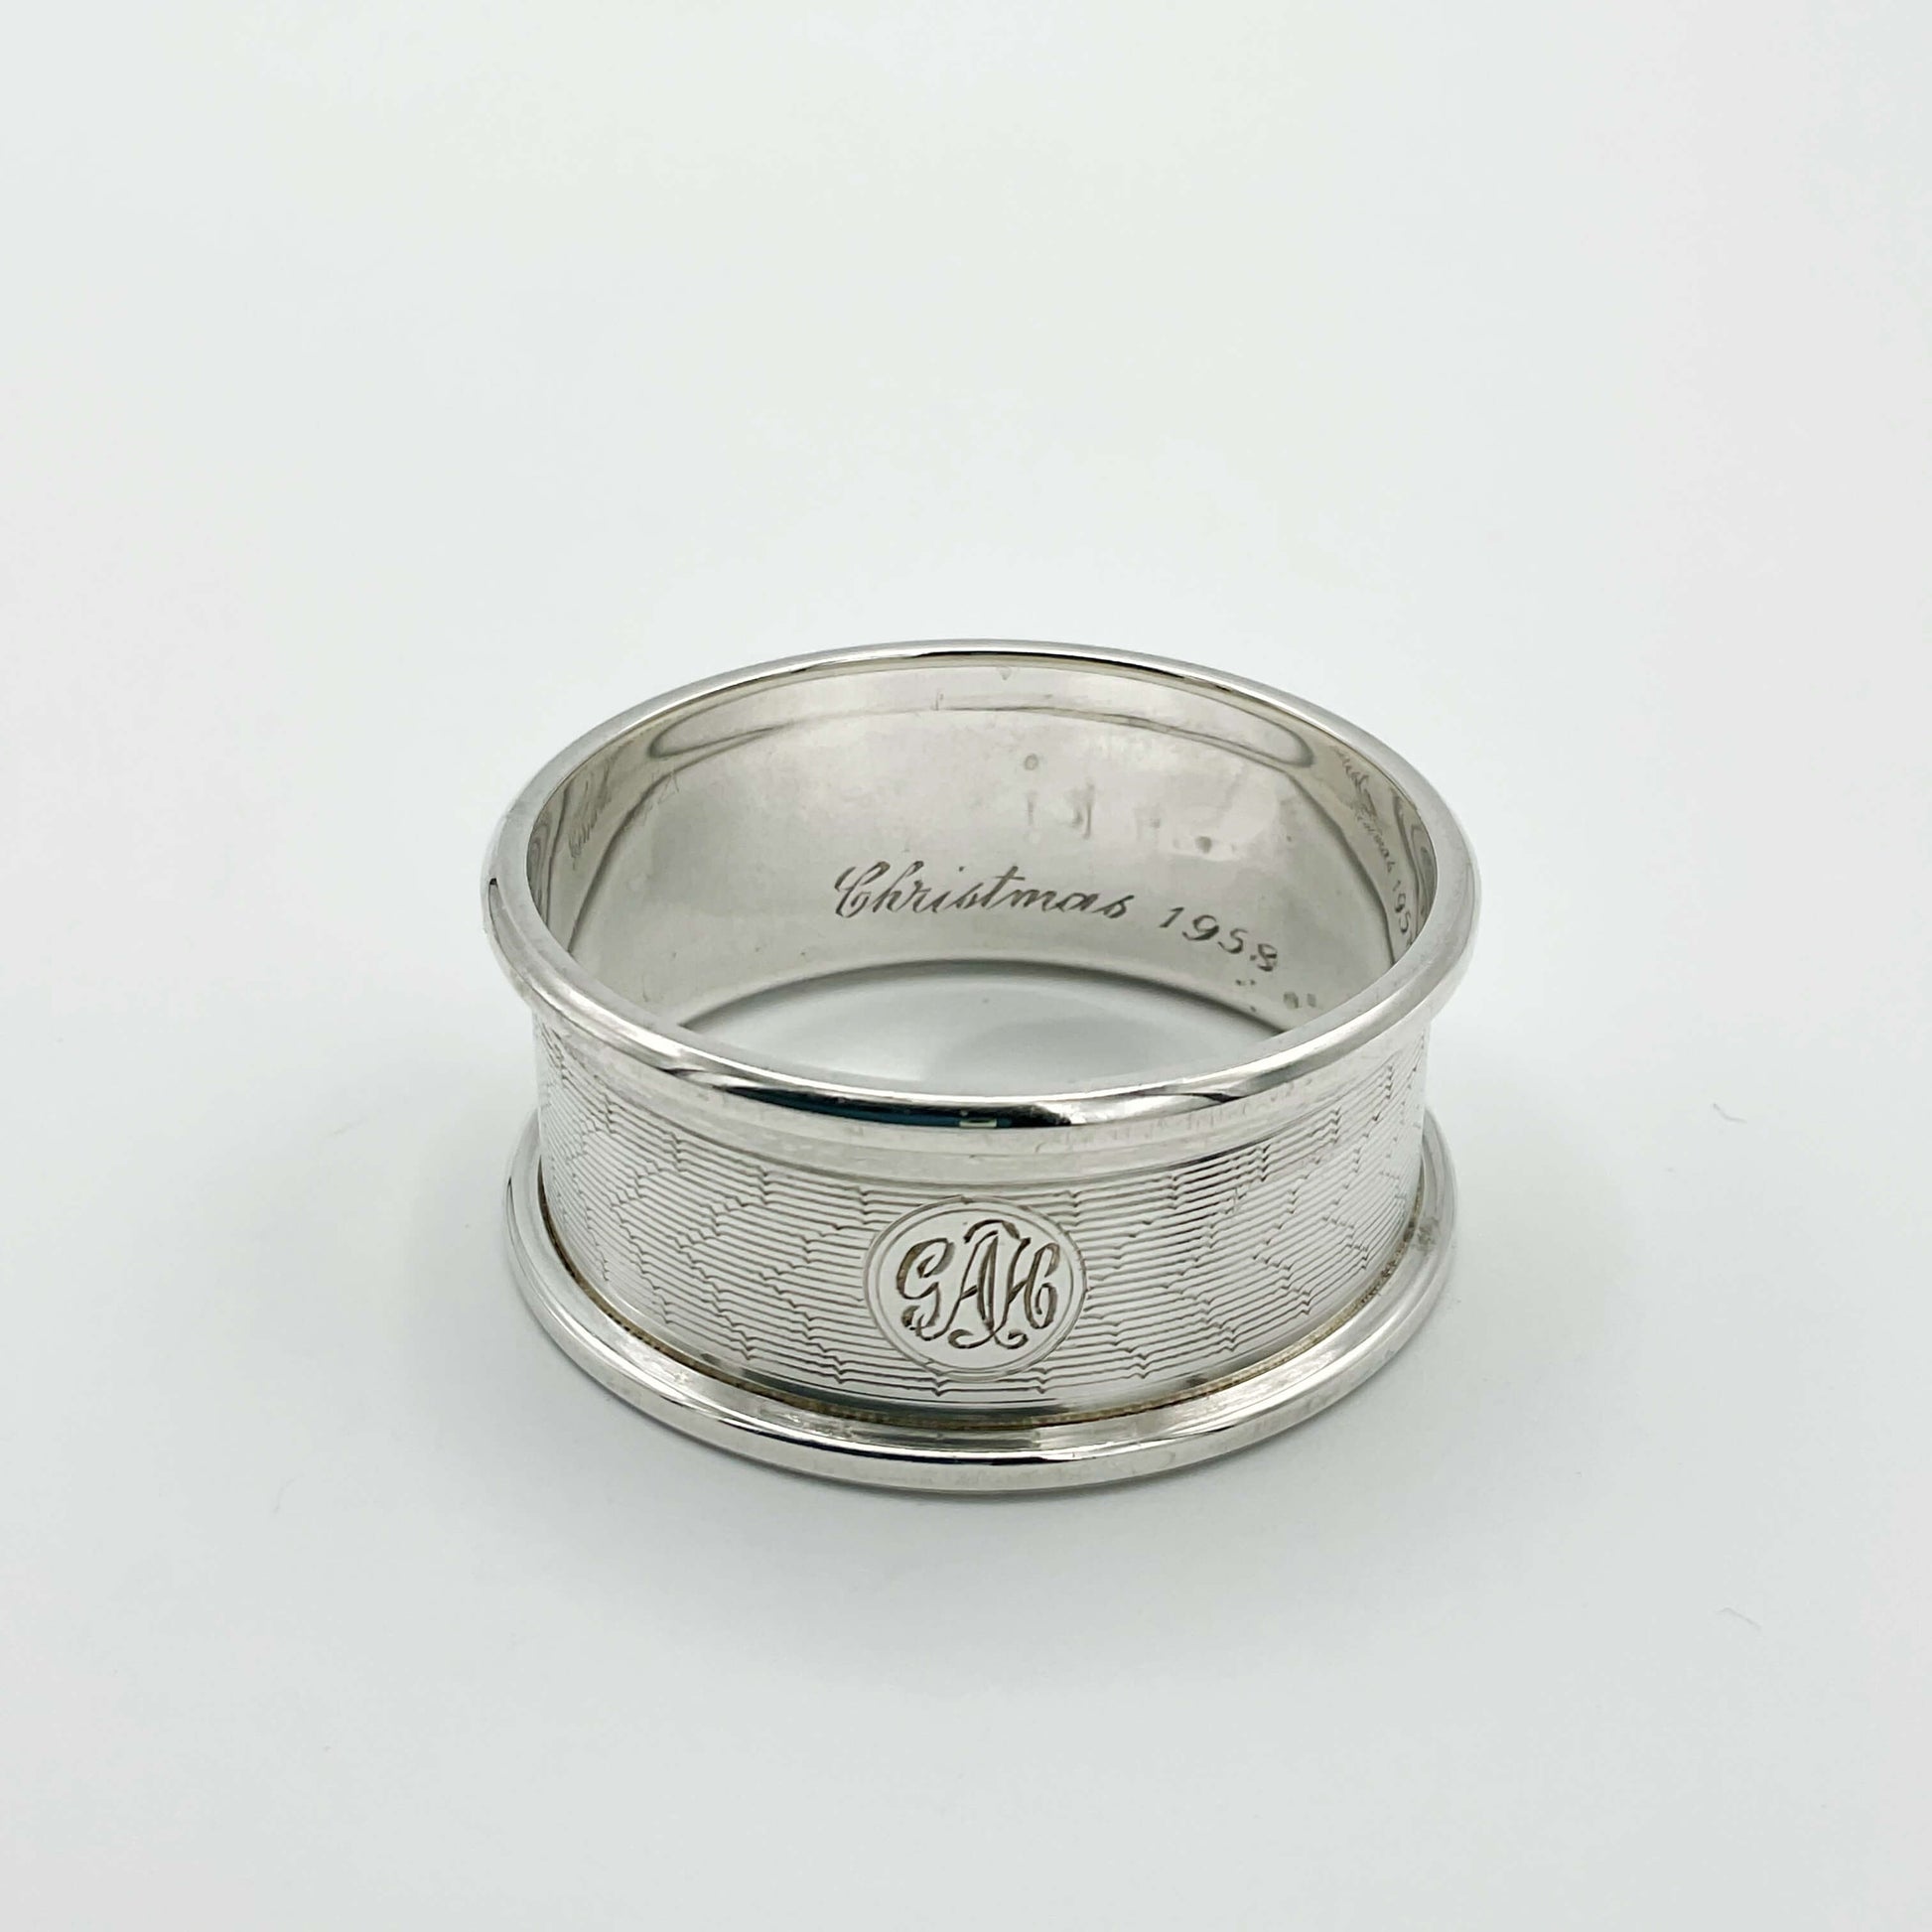 Silver napkin ring with Christmas 1958 engraved inside